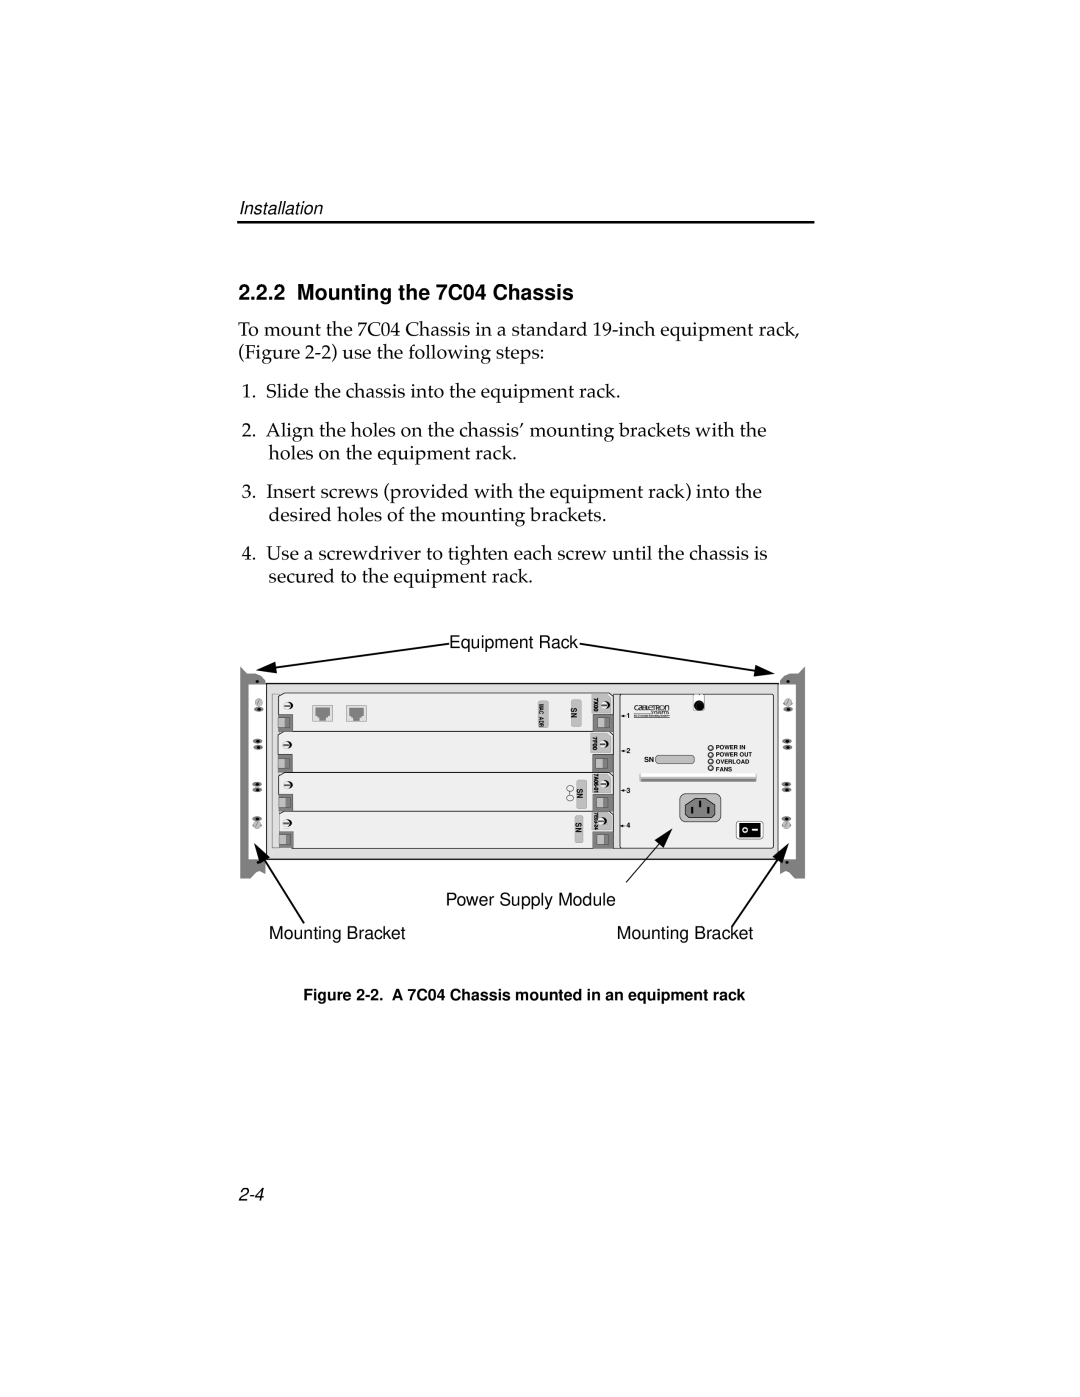 Cabletron Systems 7C04 Workgroup manual Mounting the 7C04 Chassis 